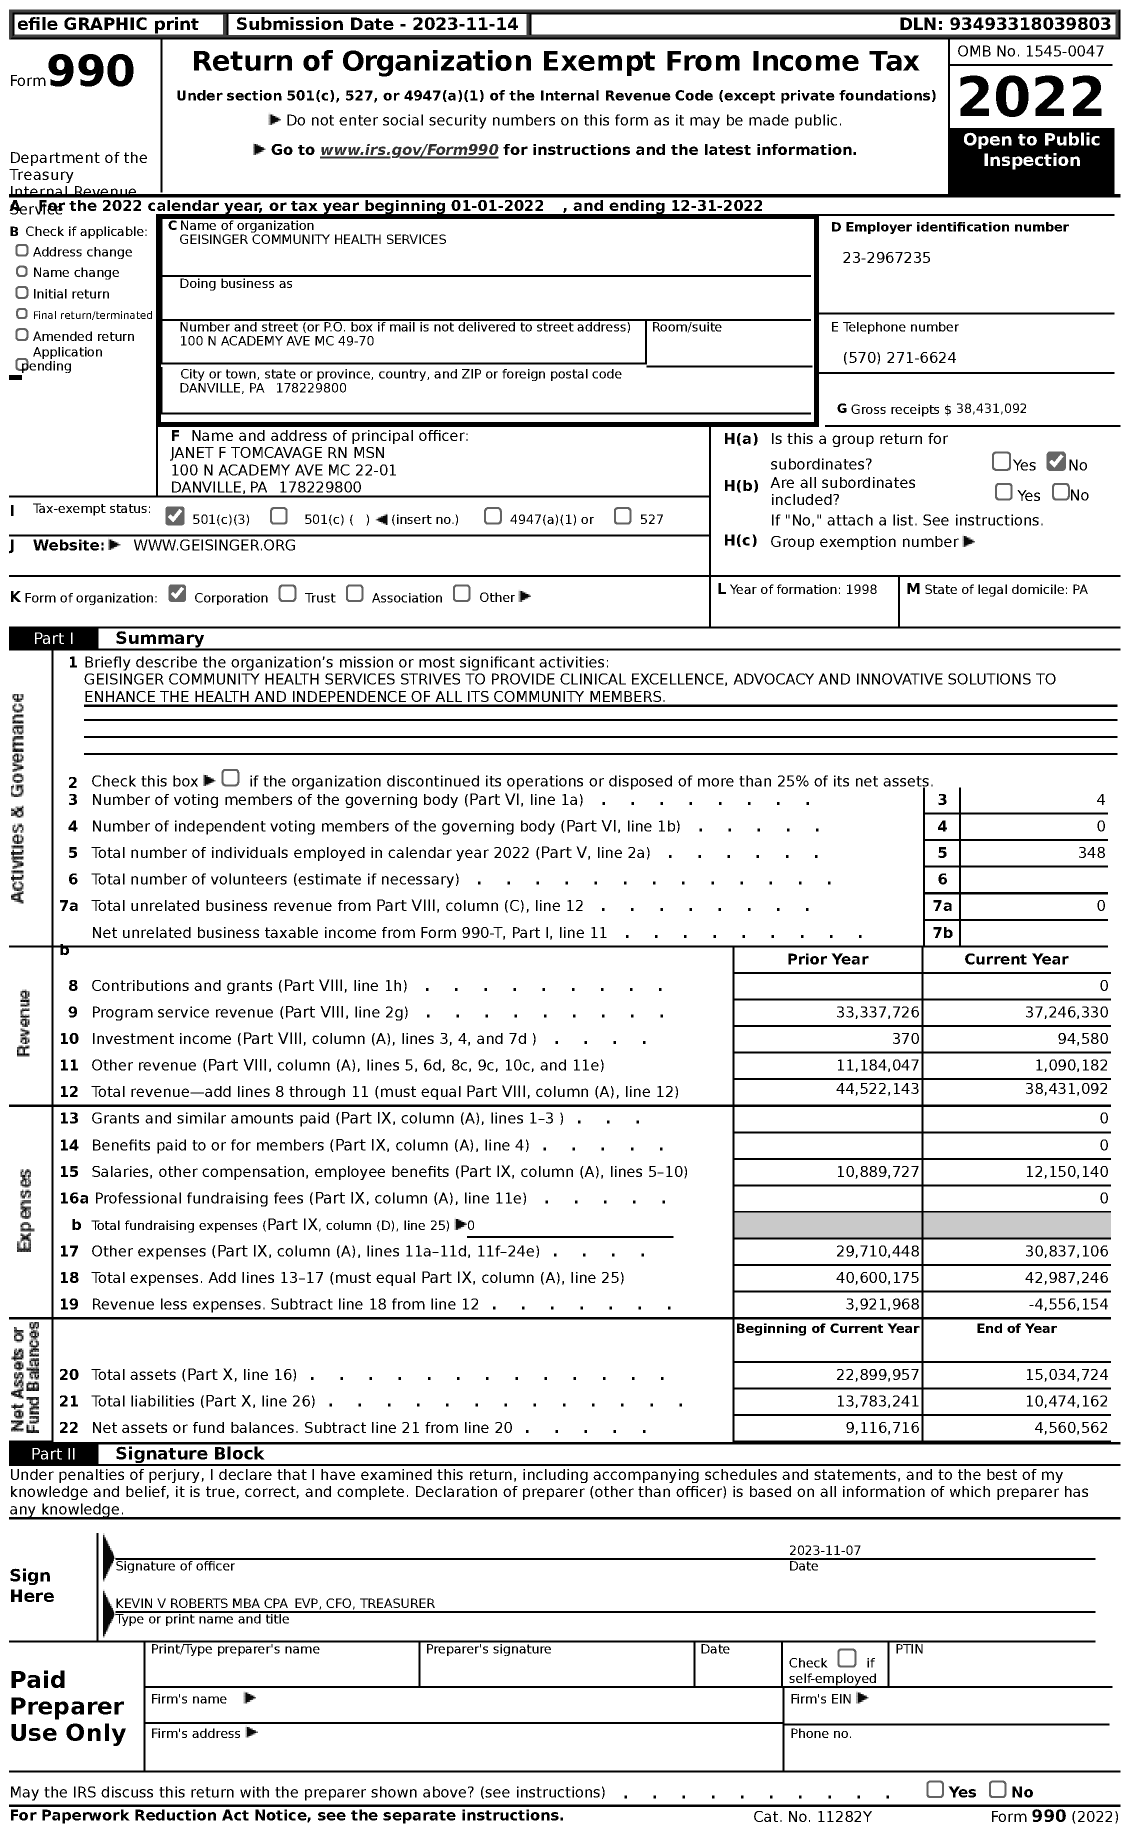 Image of first page of 2022 Form 990 for Geisinger Community Health Services (GHS)